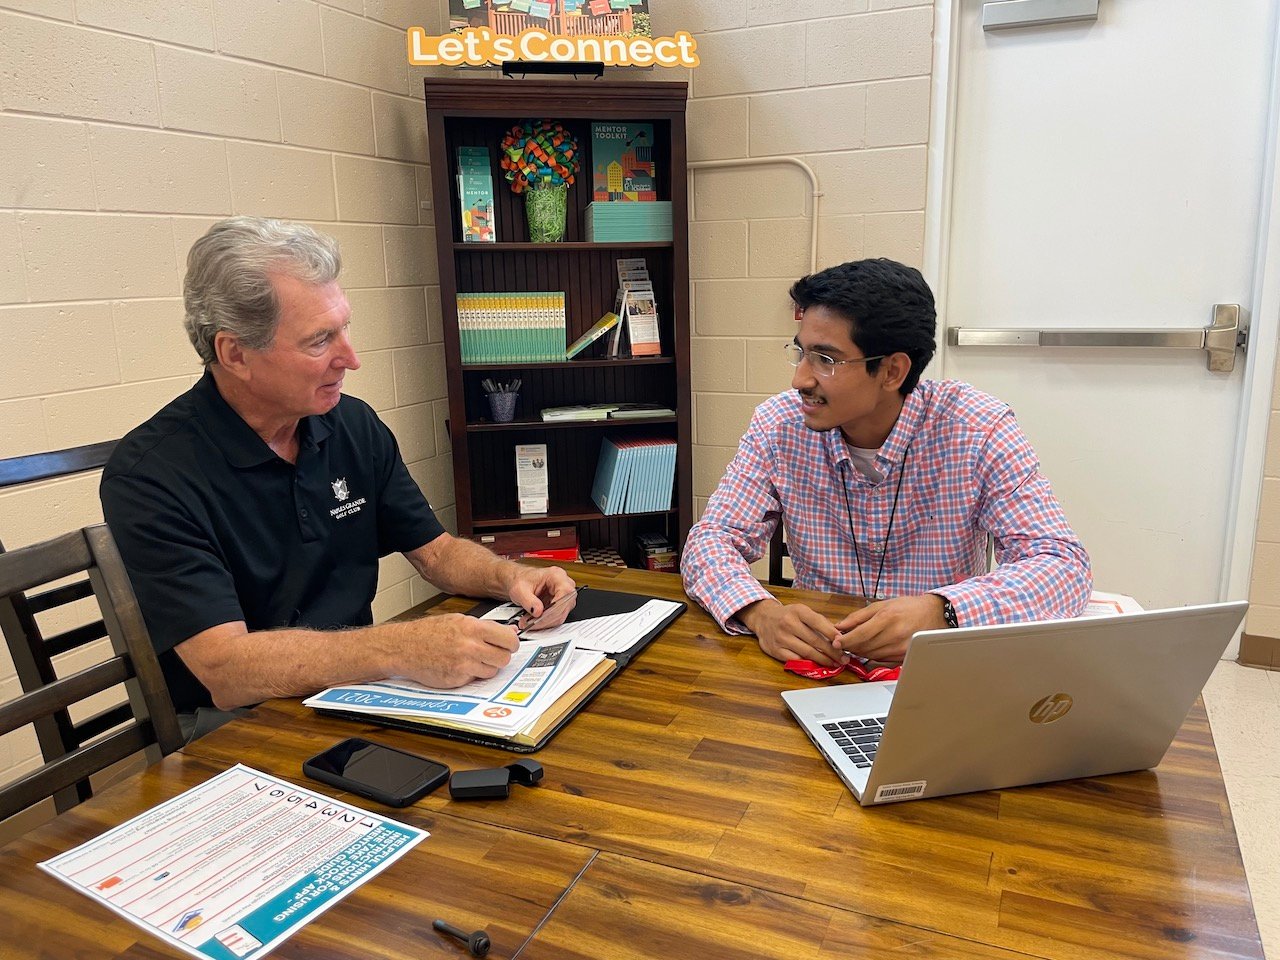 Jerry Belle, Chairman of the Board for The Immokalee Foundation, with Joel during a mentor session. As part of Take Stock in Children, students meet with a mentor once a week for at least 30 minutes.